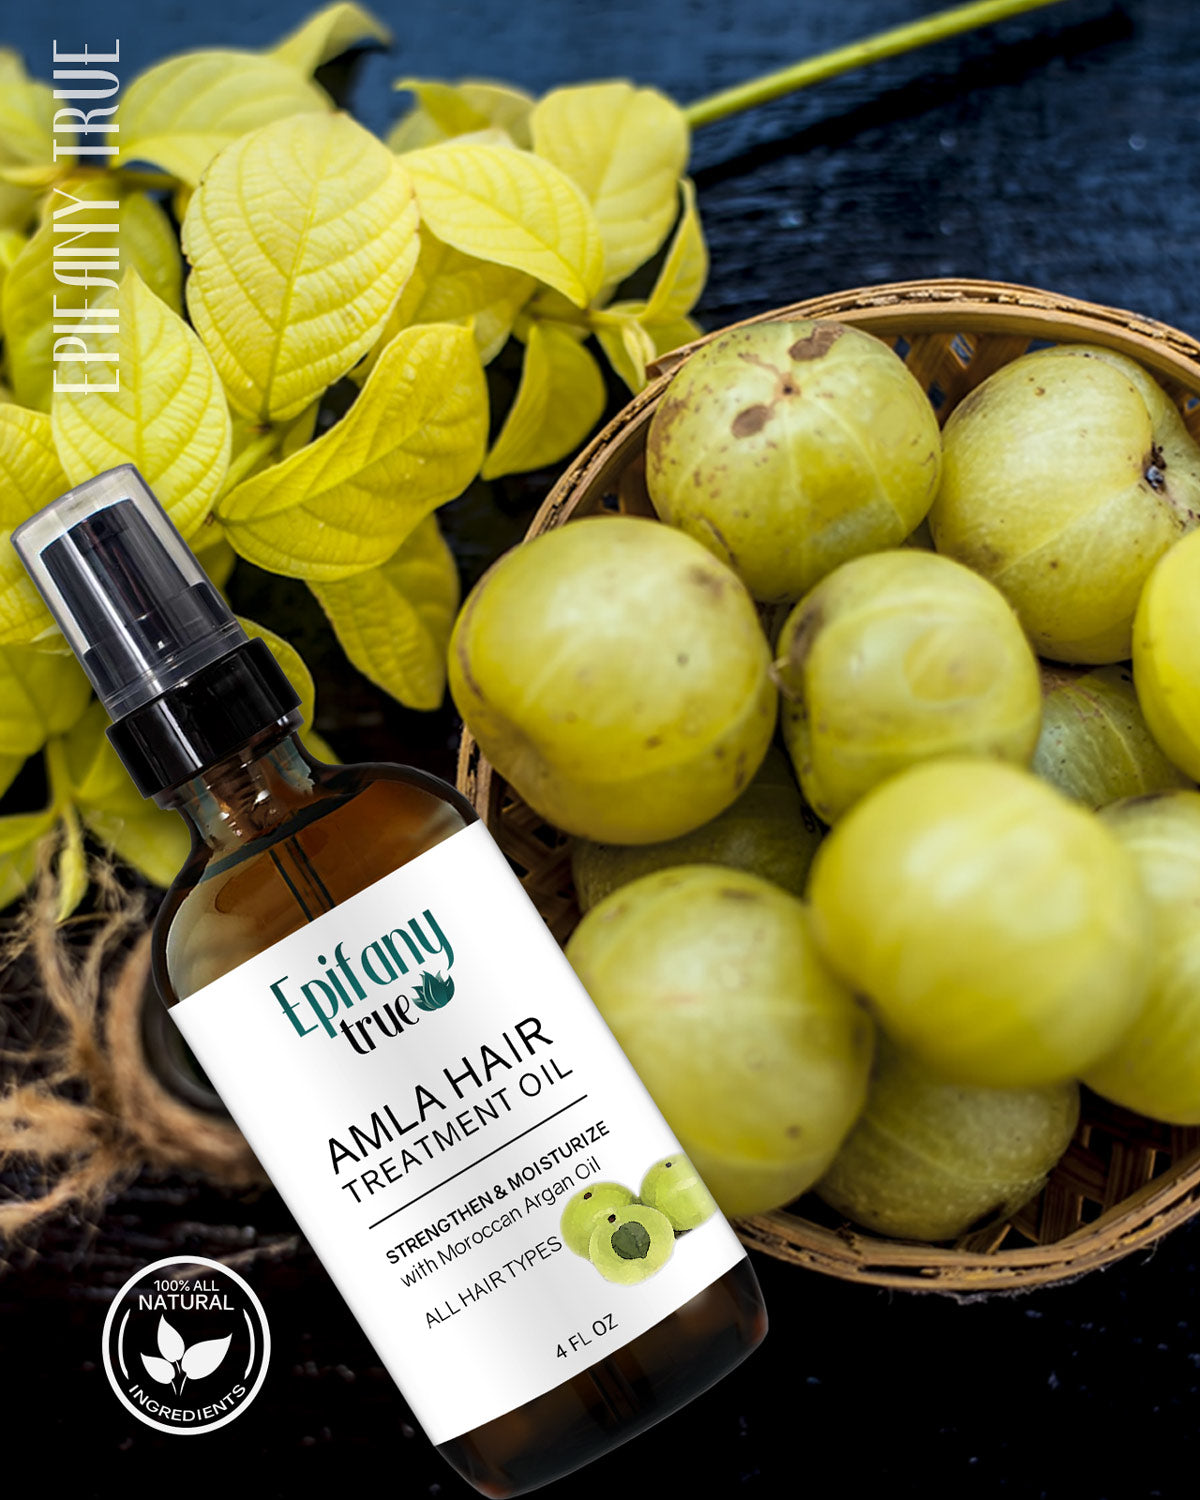 Epifany True Amla Hair Treatment Oil 4oz with natural amla fruit in a basket.